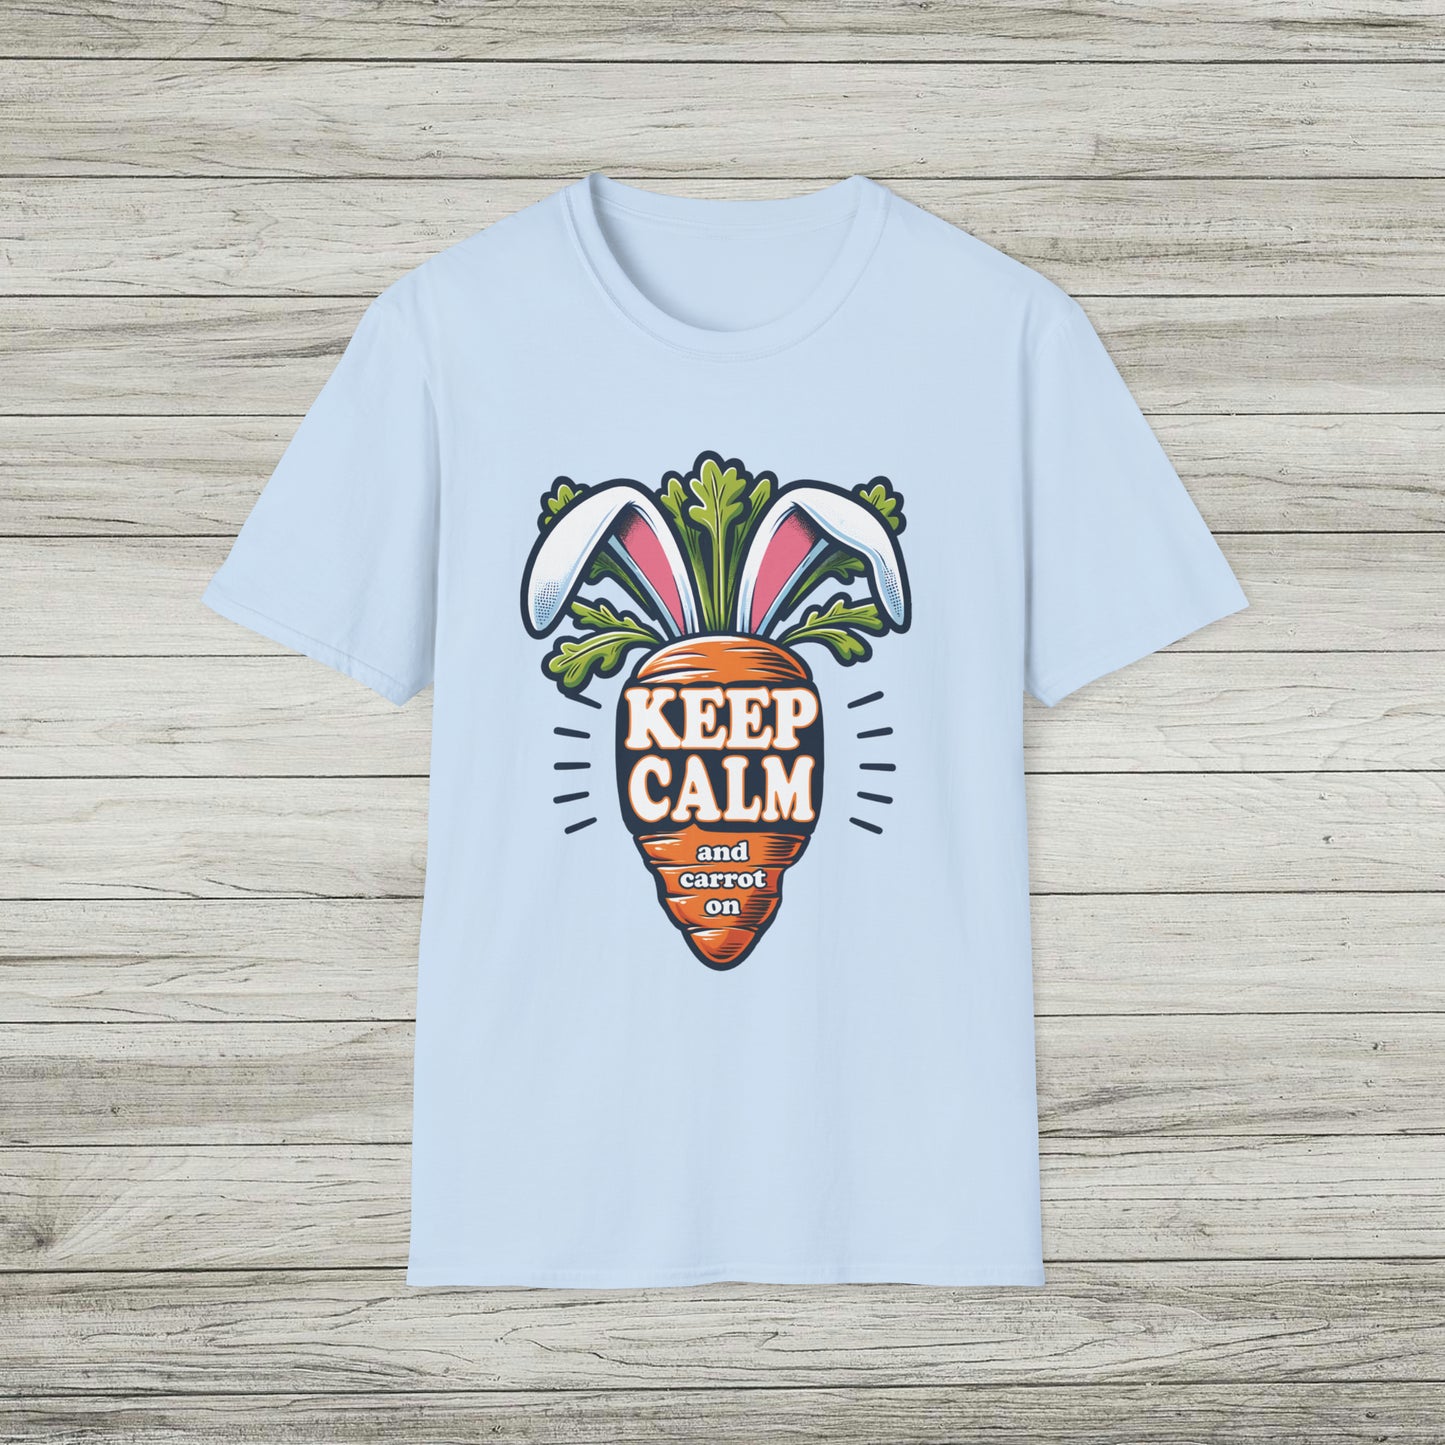 Keep Calm and Carrot On Softstyle T-Shirt, Easter Tee, Funny Bunny TShirt, Rabbit Ears Shirt